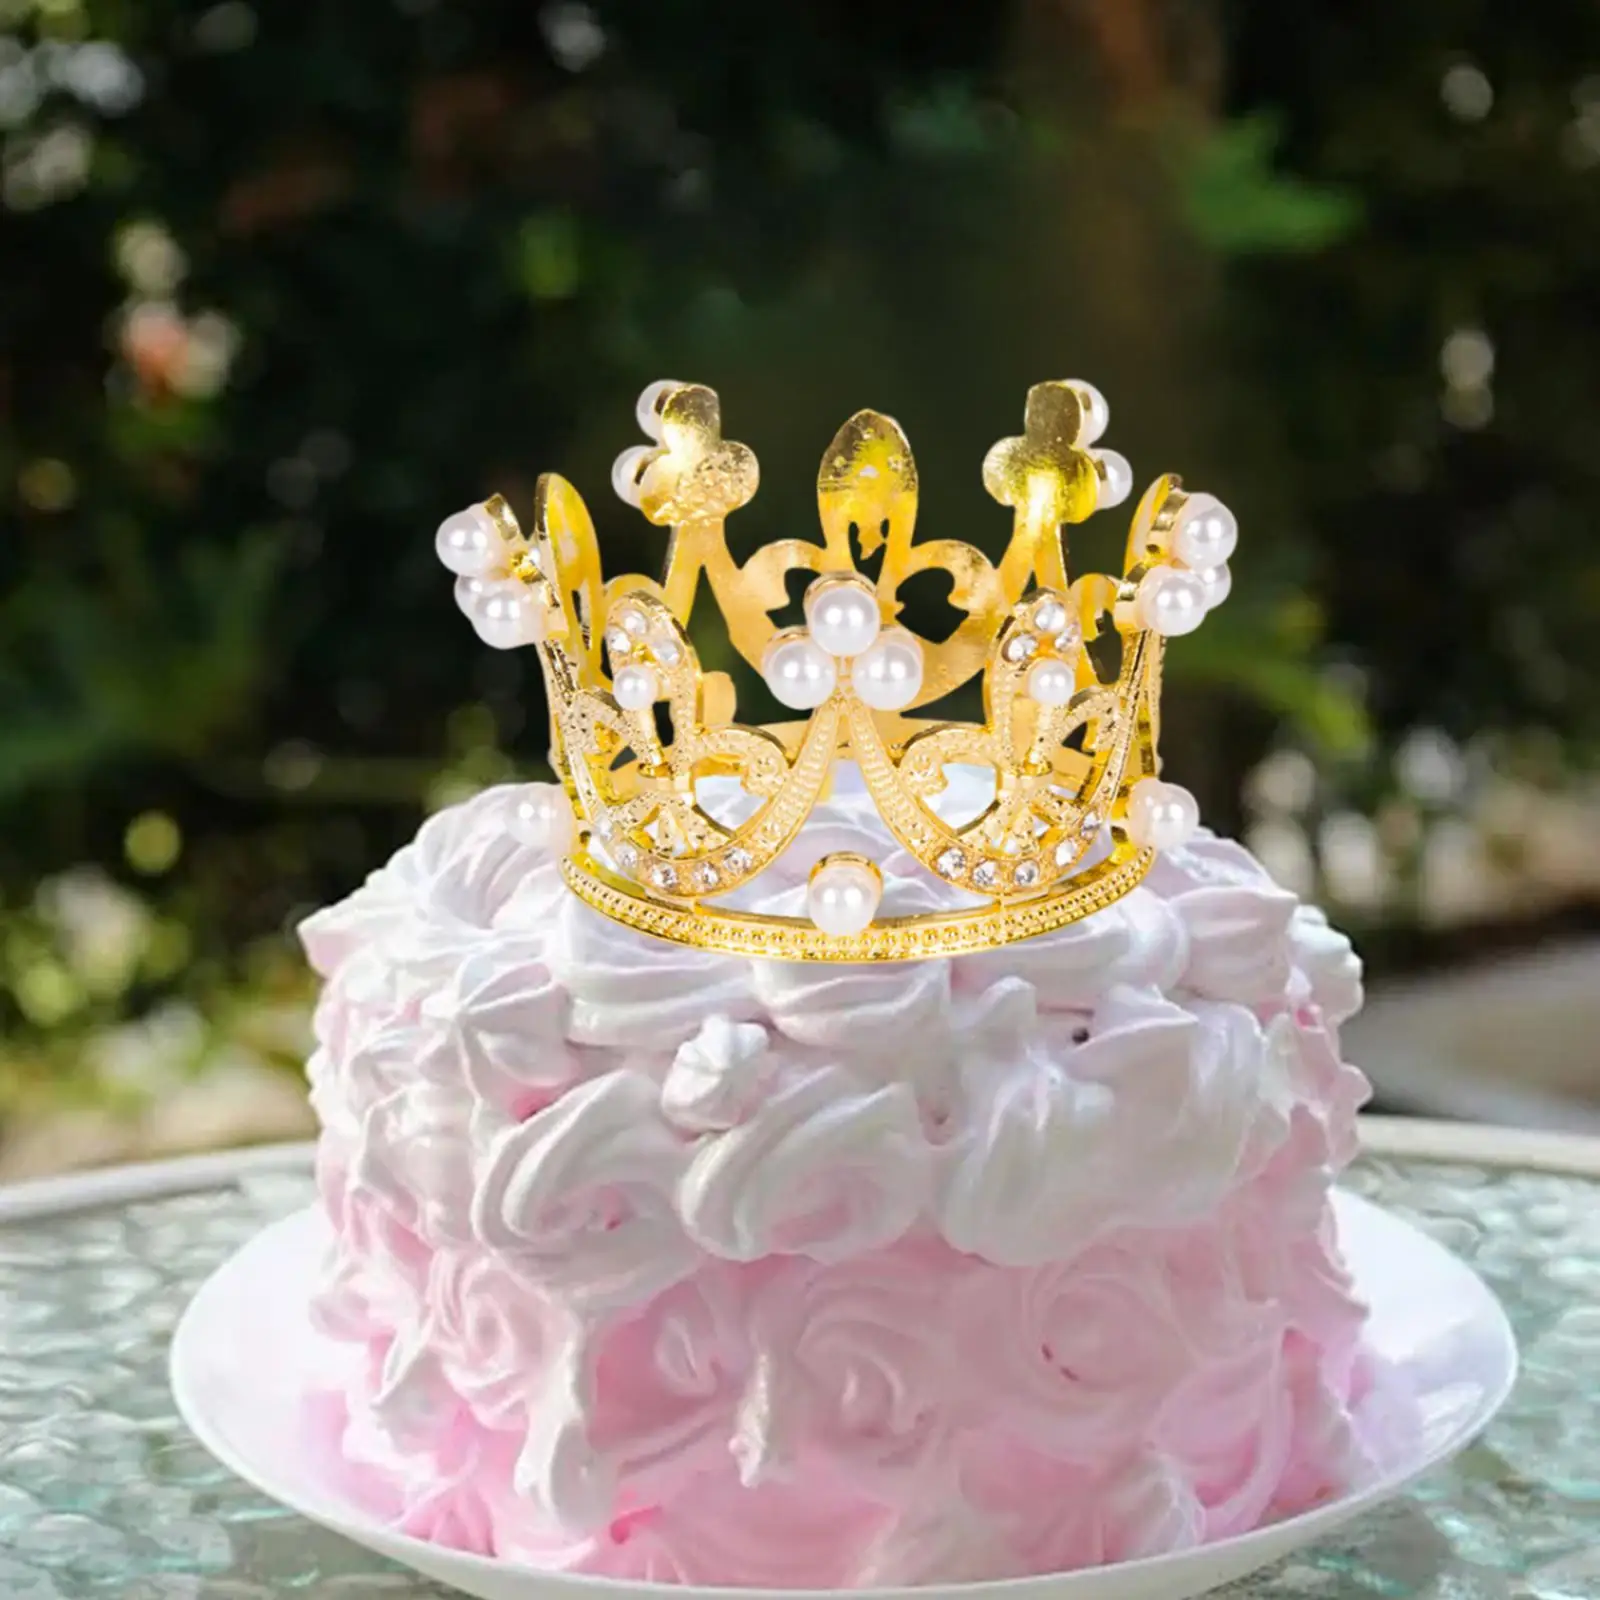 Crown Cake Topper Fashion Gift Costume Photo Prop Headdress Cake Topper for Themed Parties Birthday Wedding Supplies